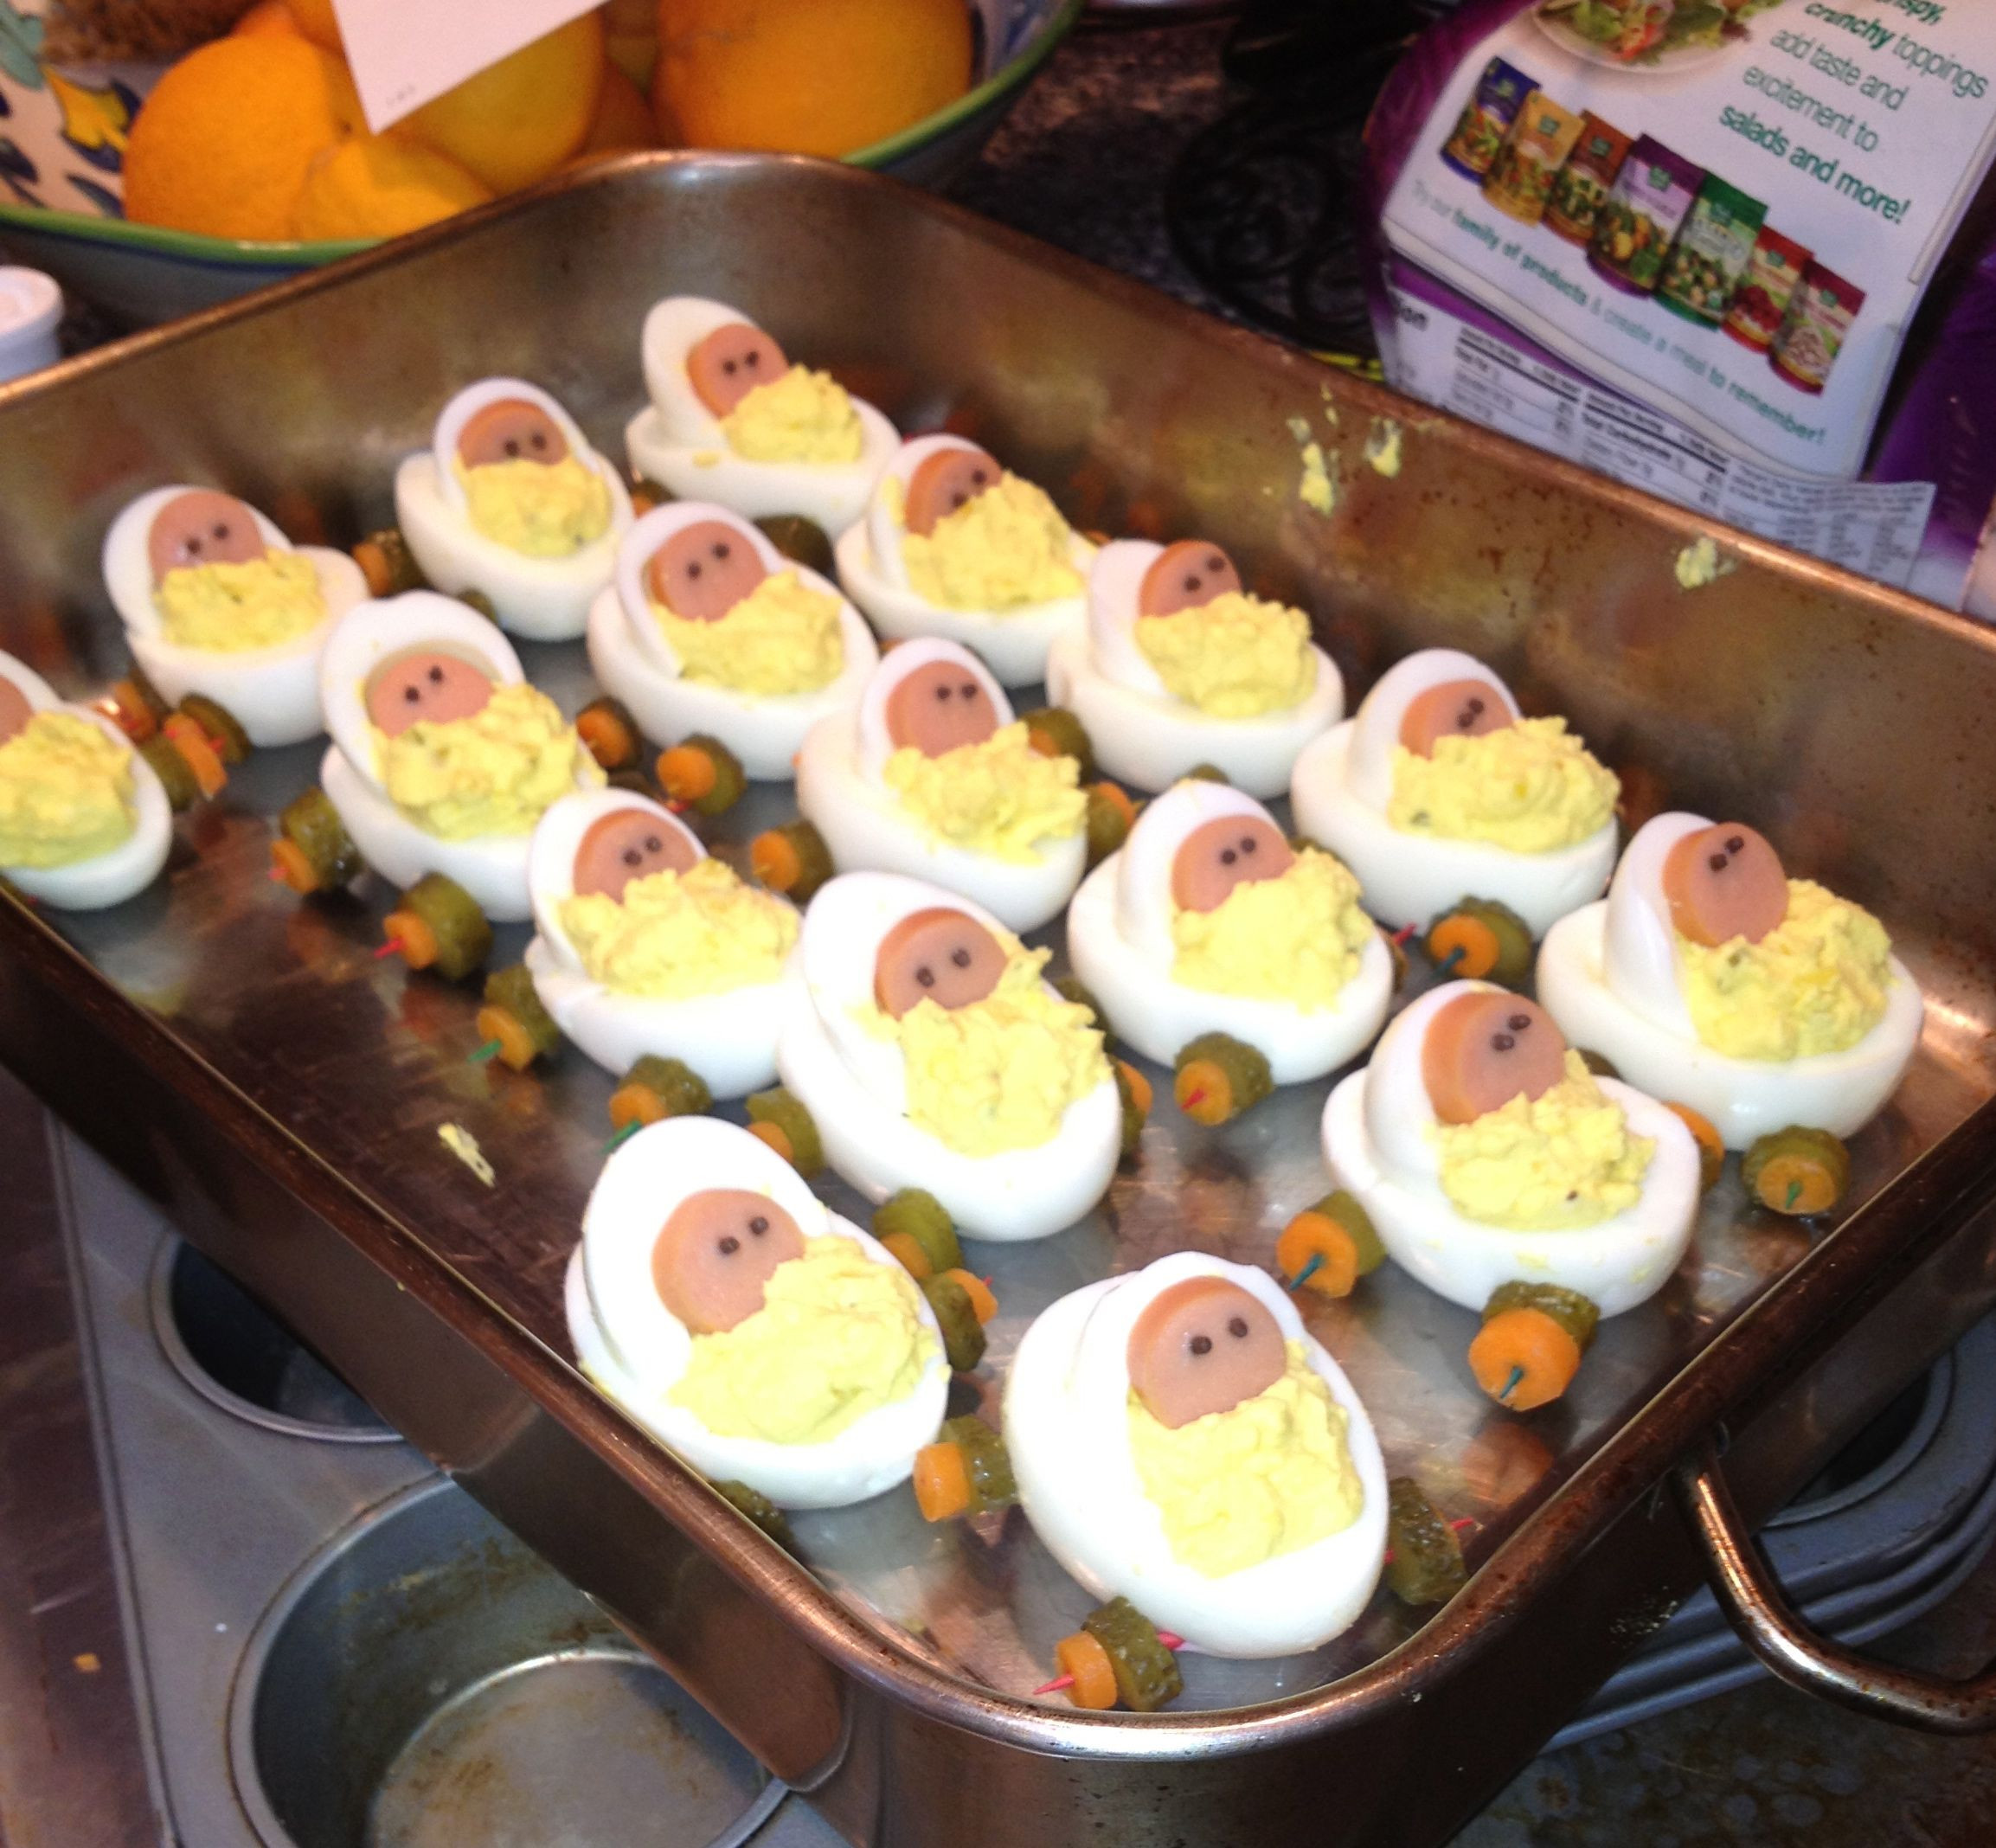 Baby Carriage Deviled Eggs
 deviled egg baby carriages I did these for the guys